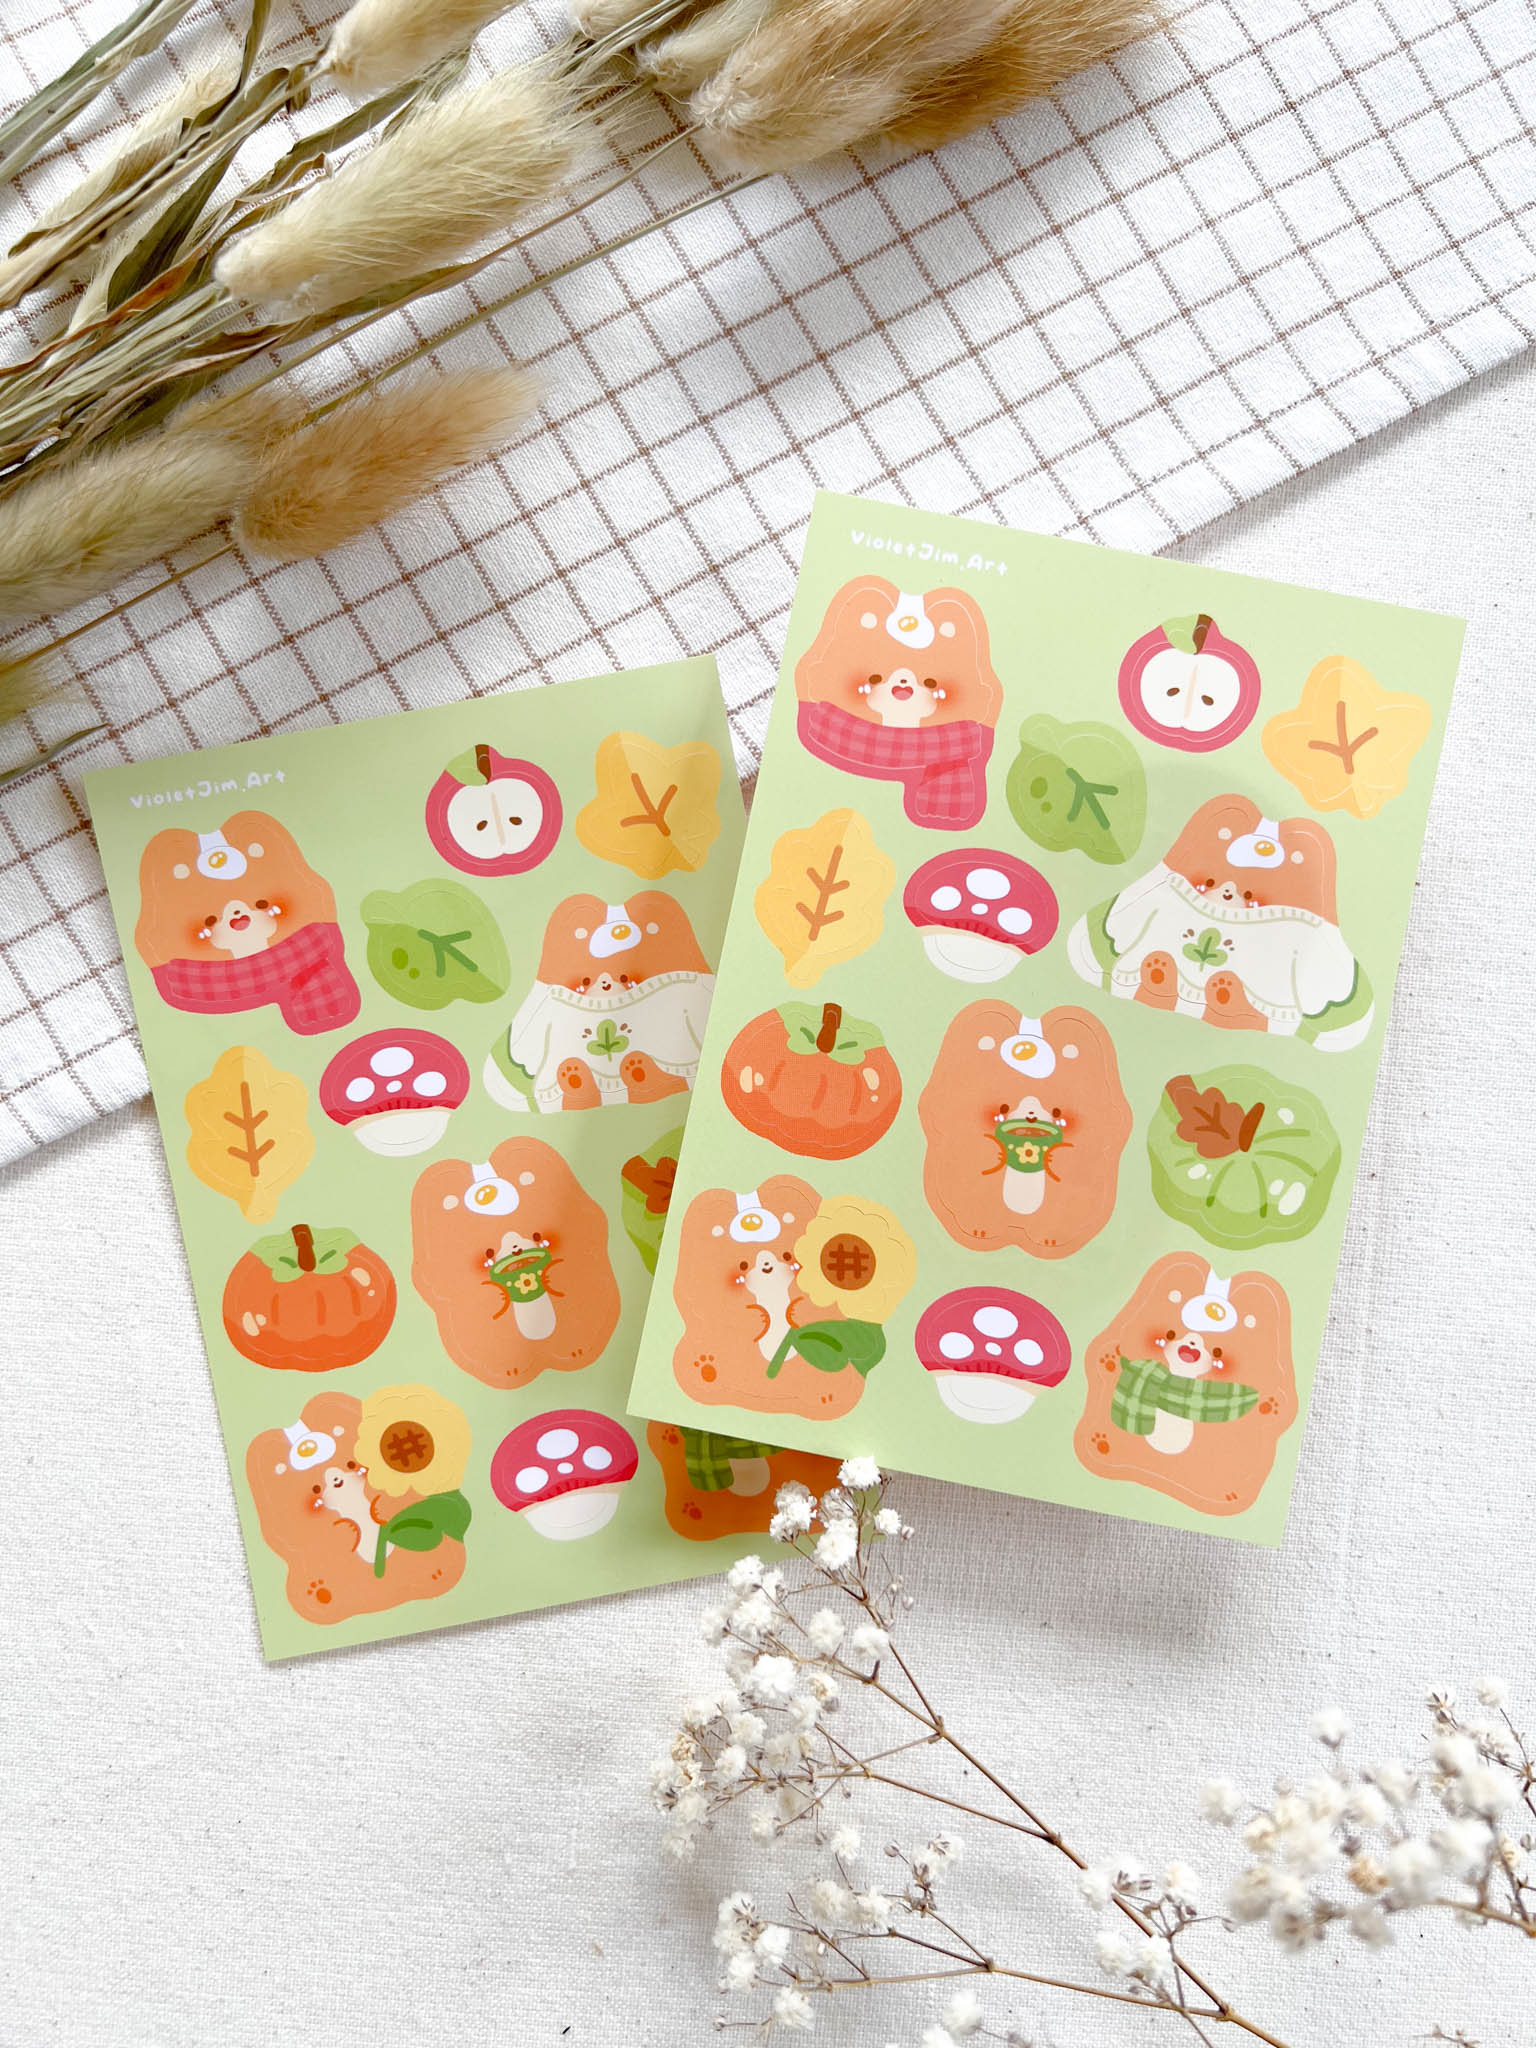 Autumn Themed Matte Vinyl Sticker Sheet - Corgi Mochi with Pumpkins and Fall Leaves - Water Resistant & High Quality - A6 Size